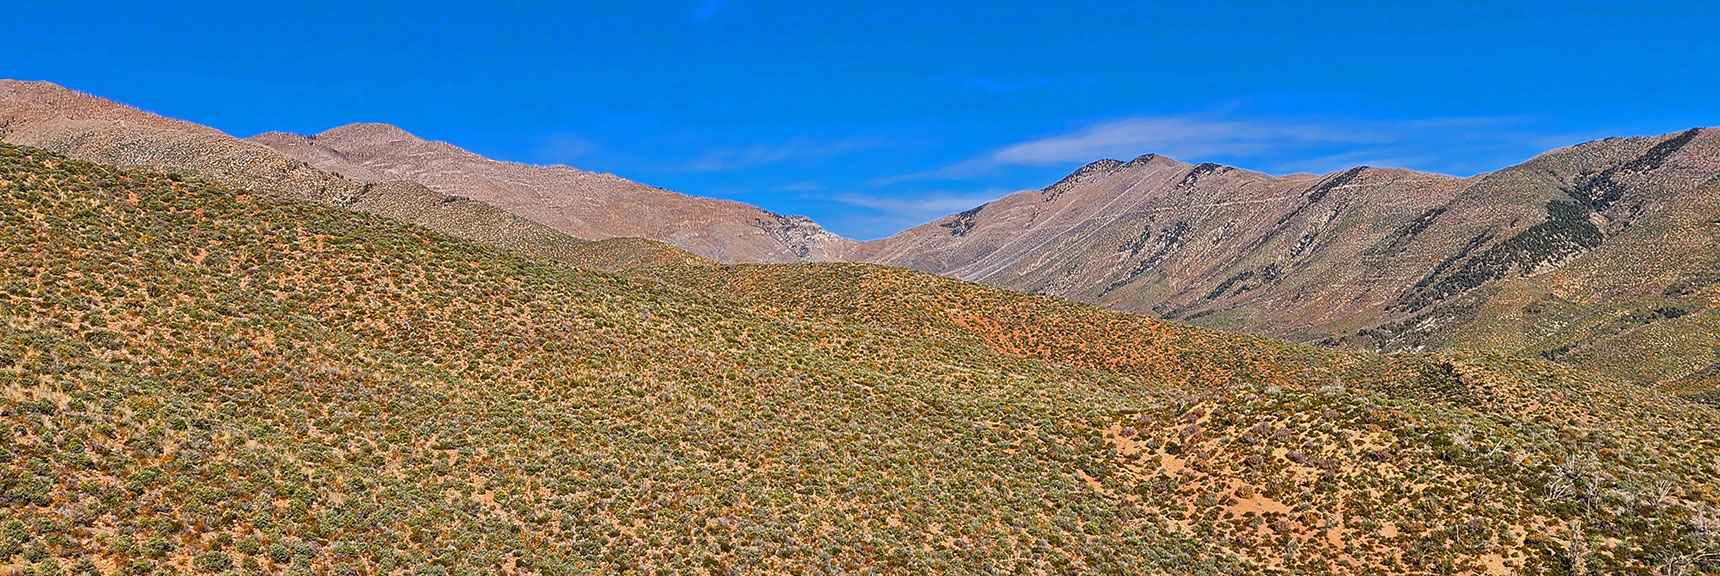 Griffith Peak (left) Marks High Point on Sexton Ridge, Western Border of Lovell Canyon | Griffith Shadow Loop | Lovell Canyon, Nevada